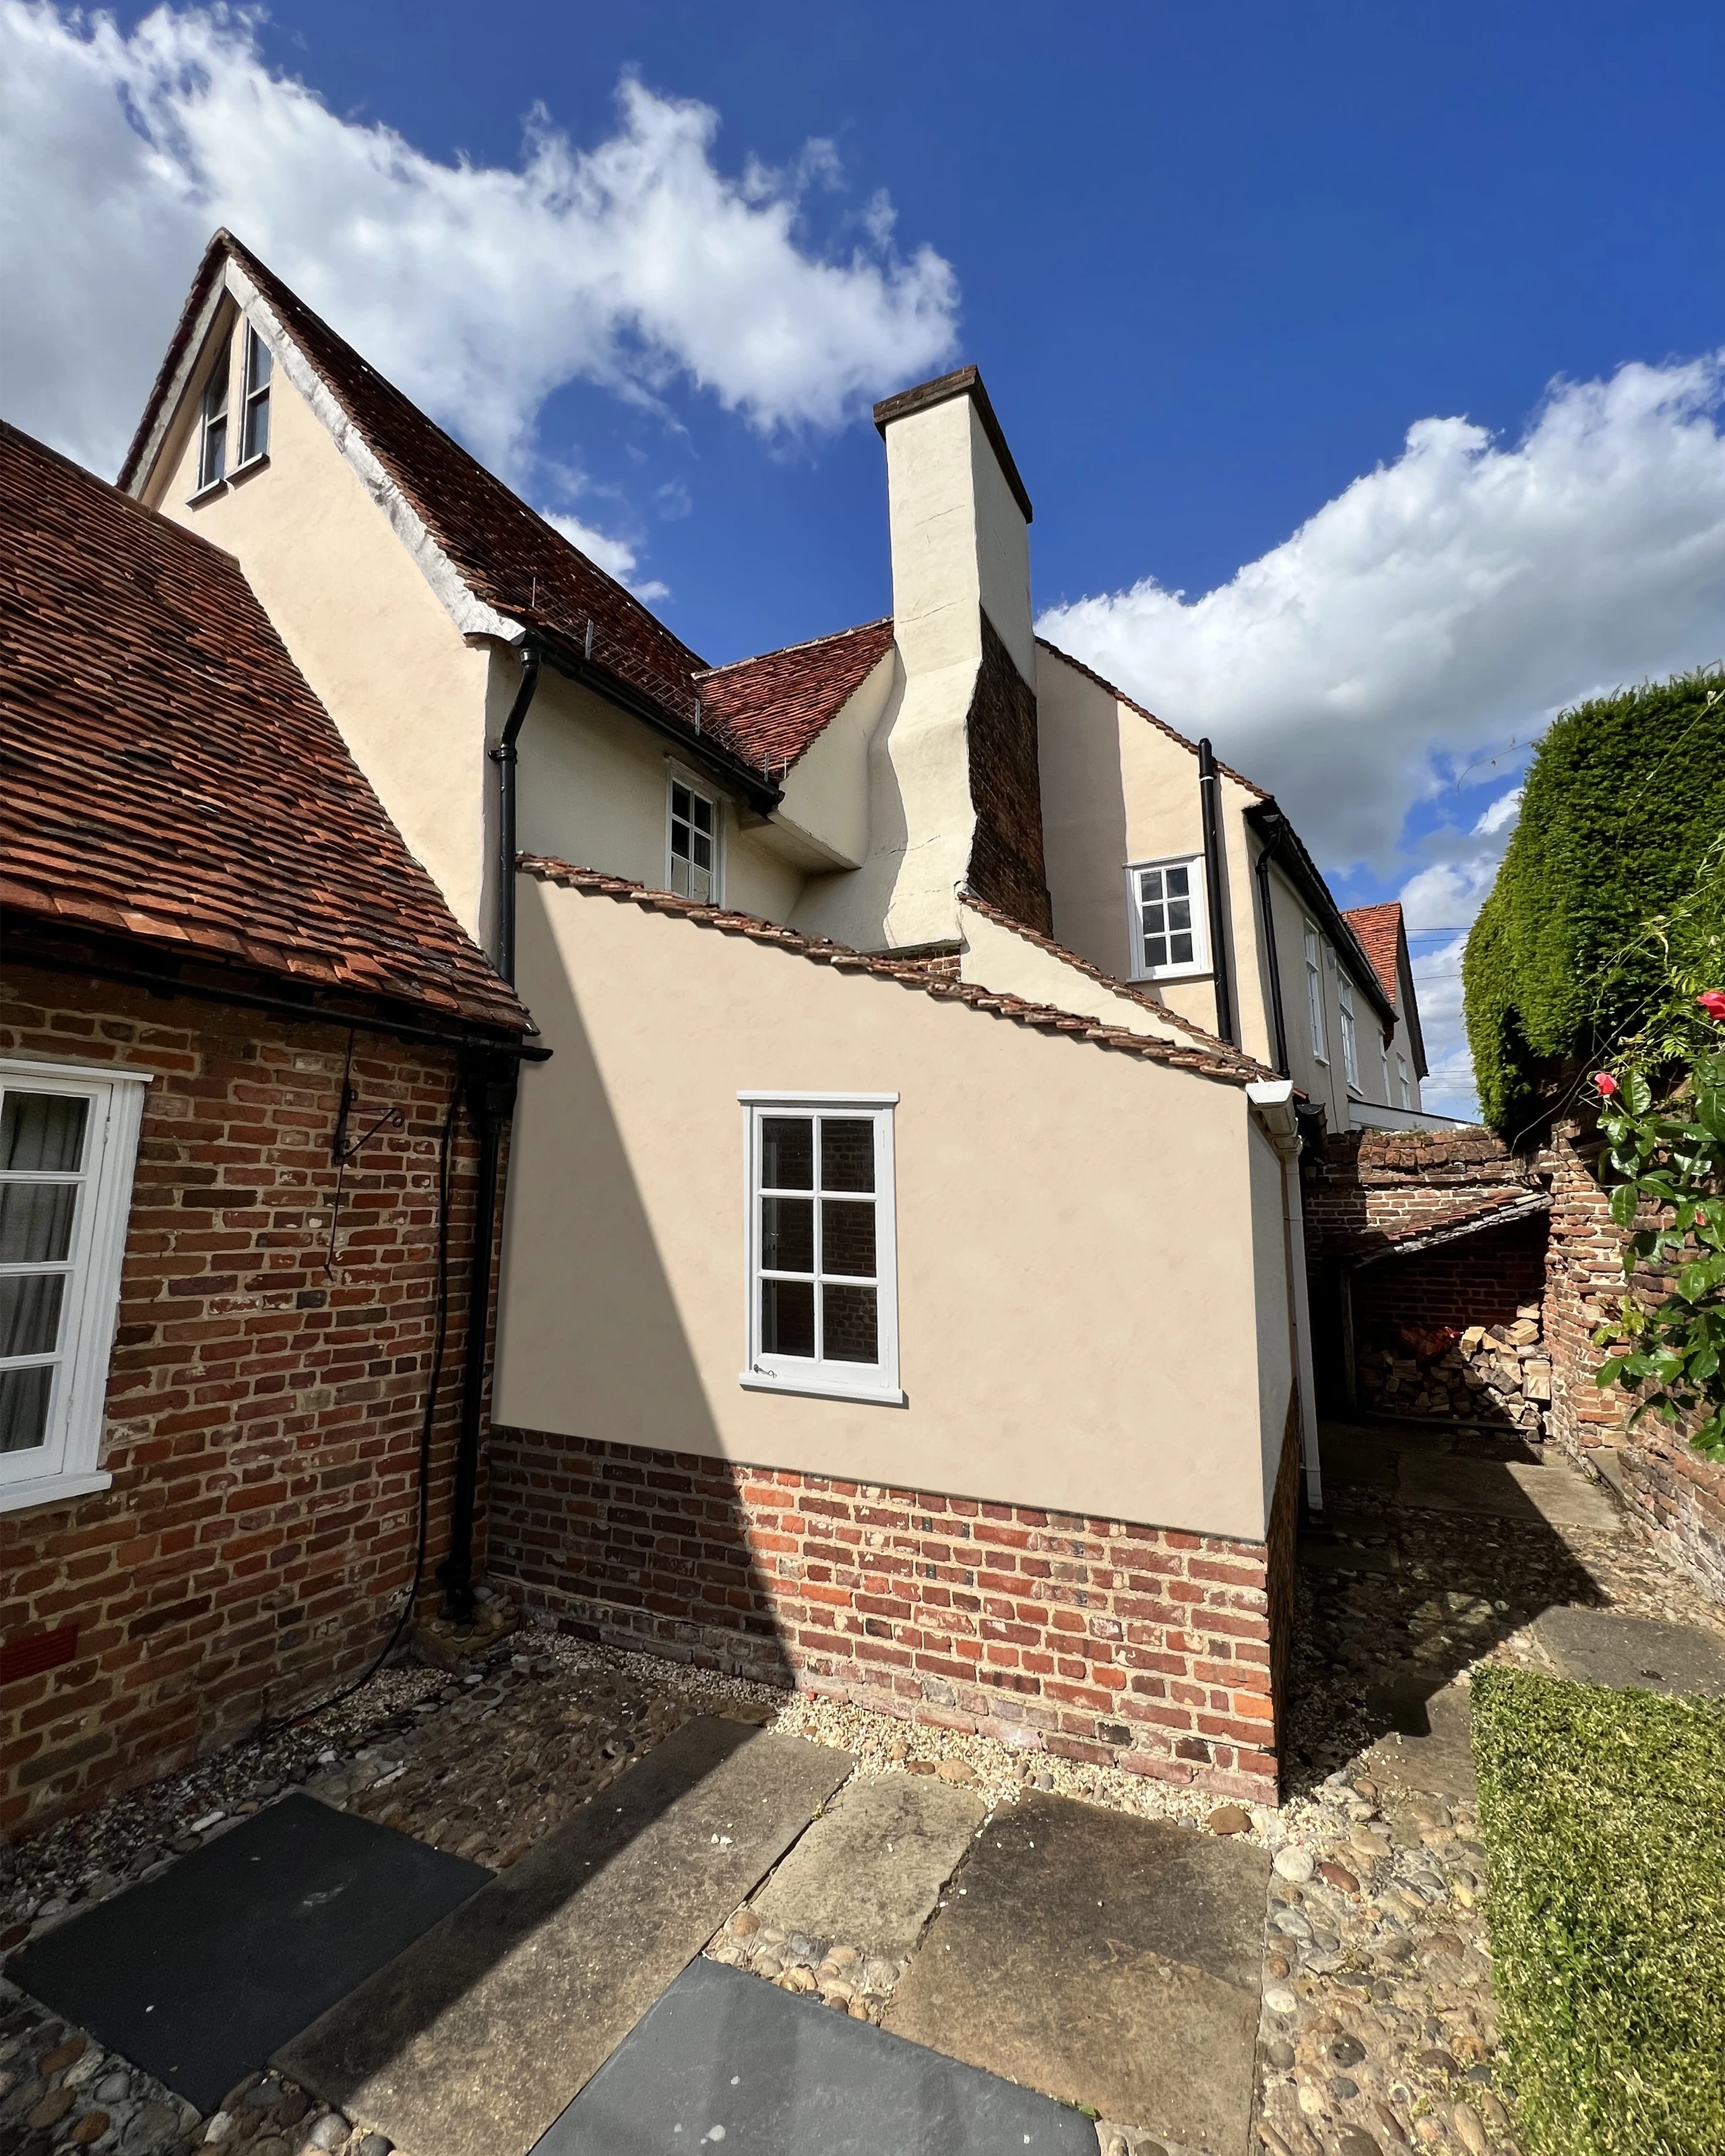 Extension to Grade II listed property in East Herts District